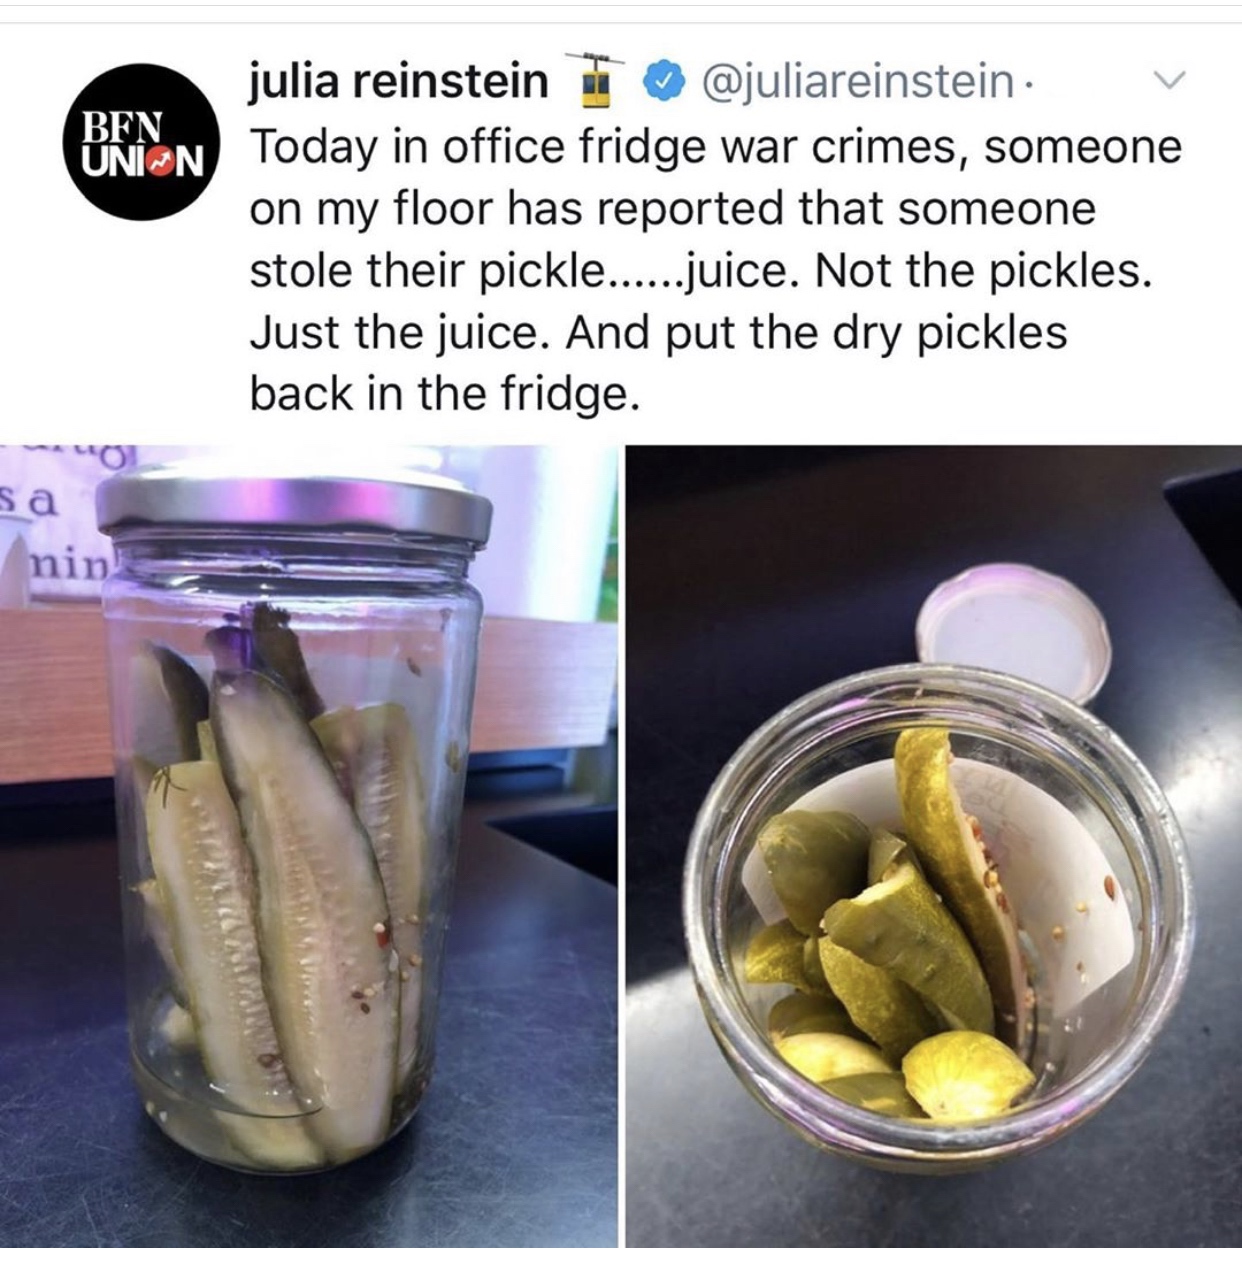 office pickle juice - Bfn Union julia reinstein Today in office fridge war crimes, someone on my floor has reported that someone stole their pickle......juice. Not the pickles. Just the juice. And put the dry pickles back in the fridge. sa nin